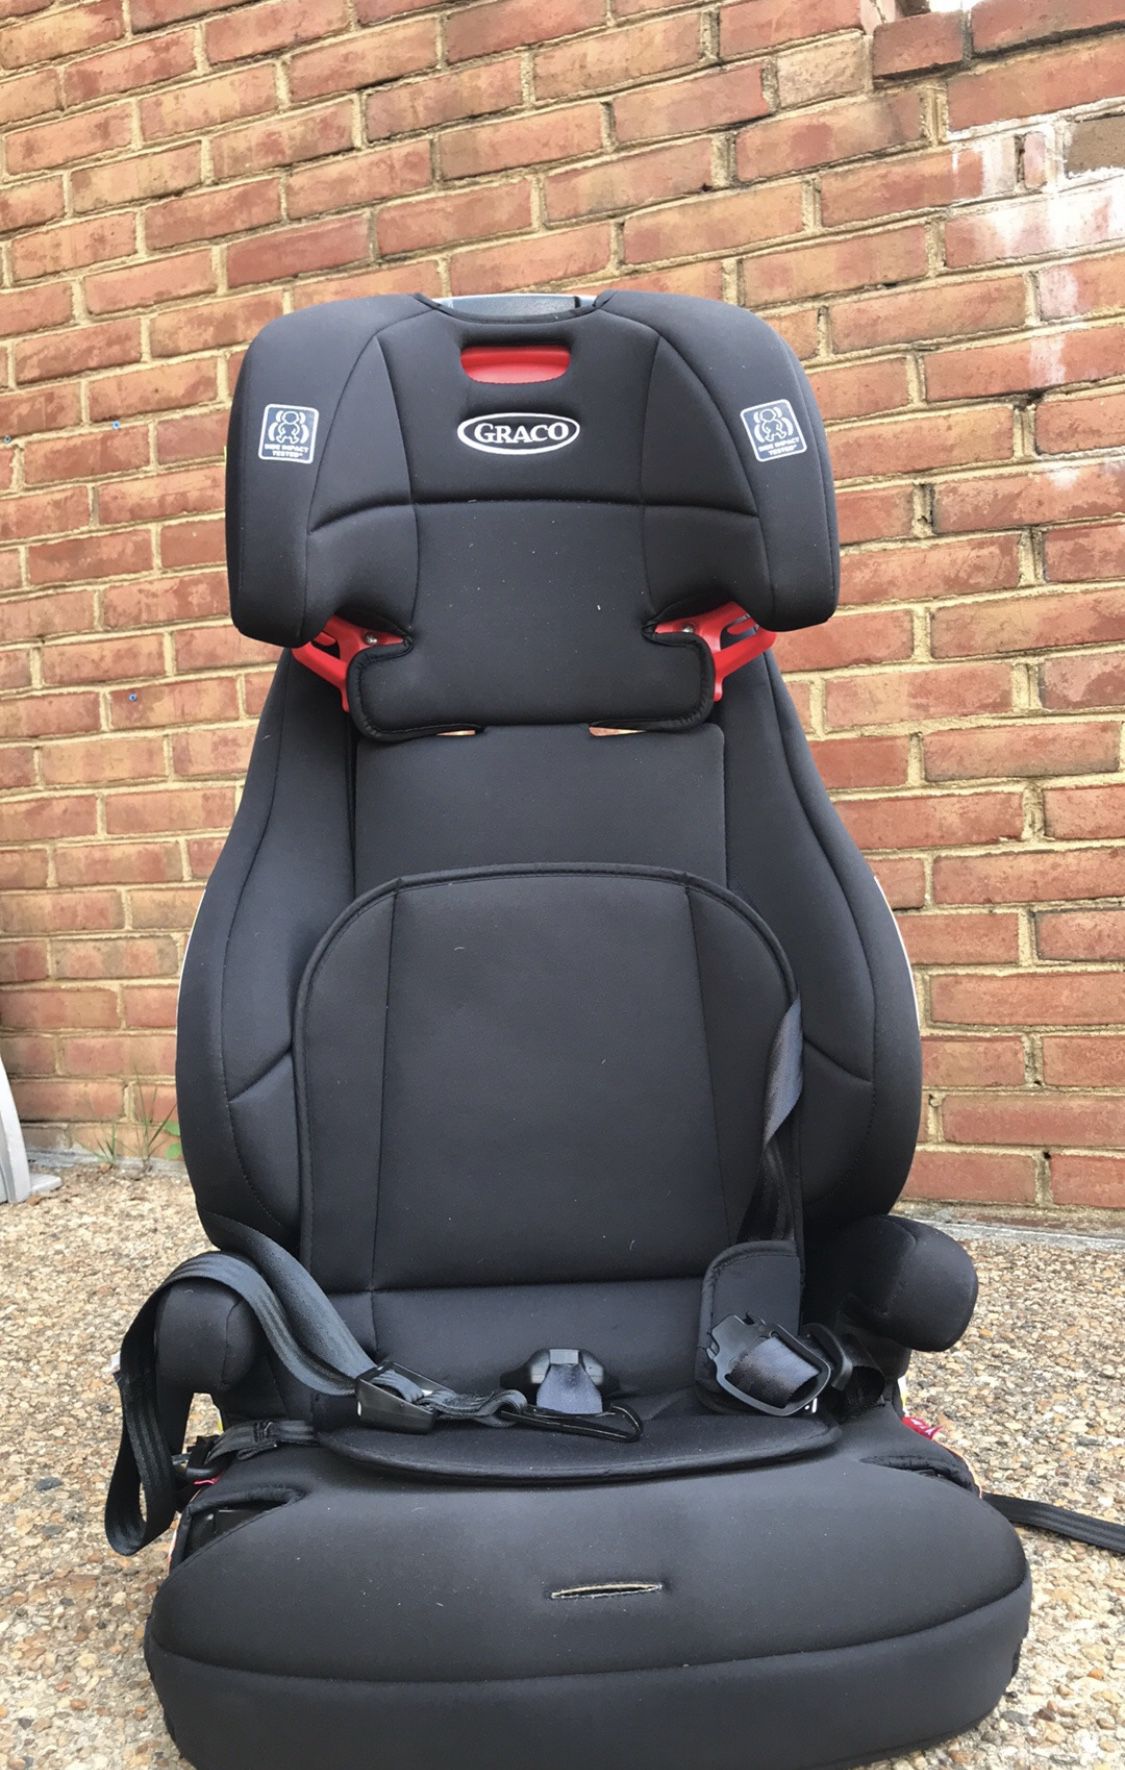 Graco Highback booster car seat